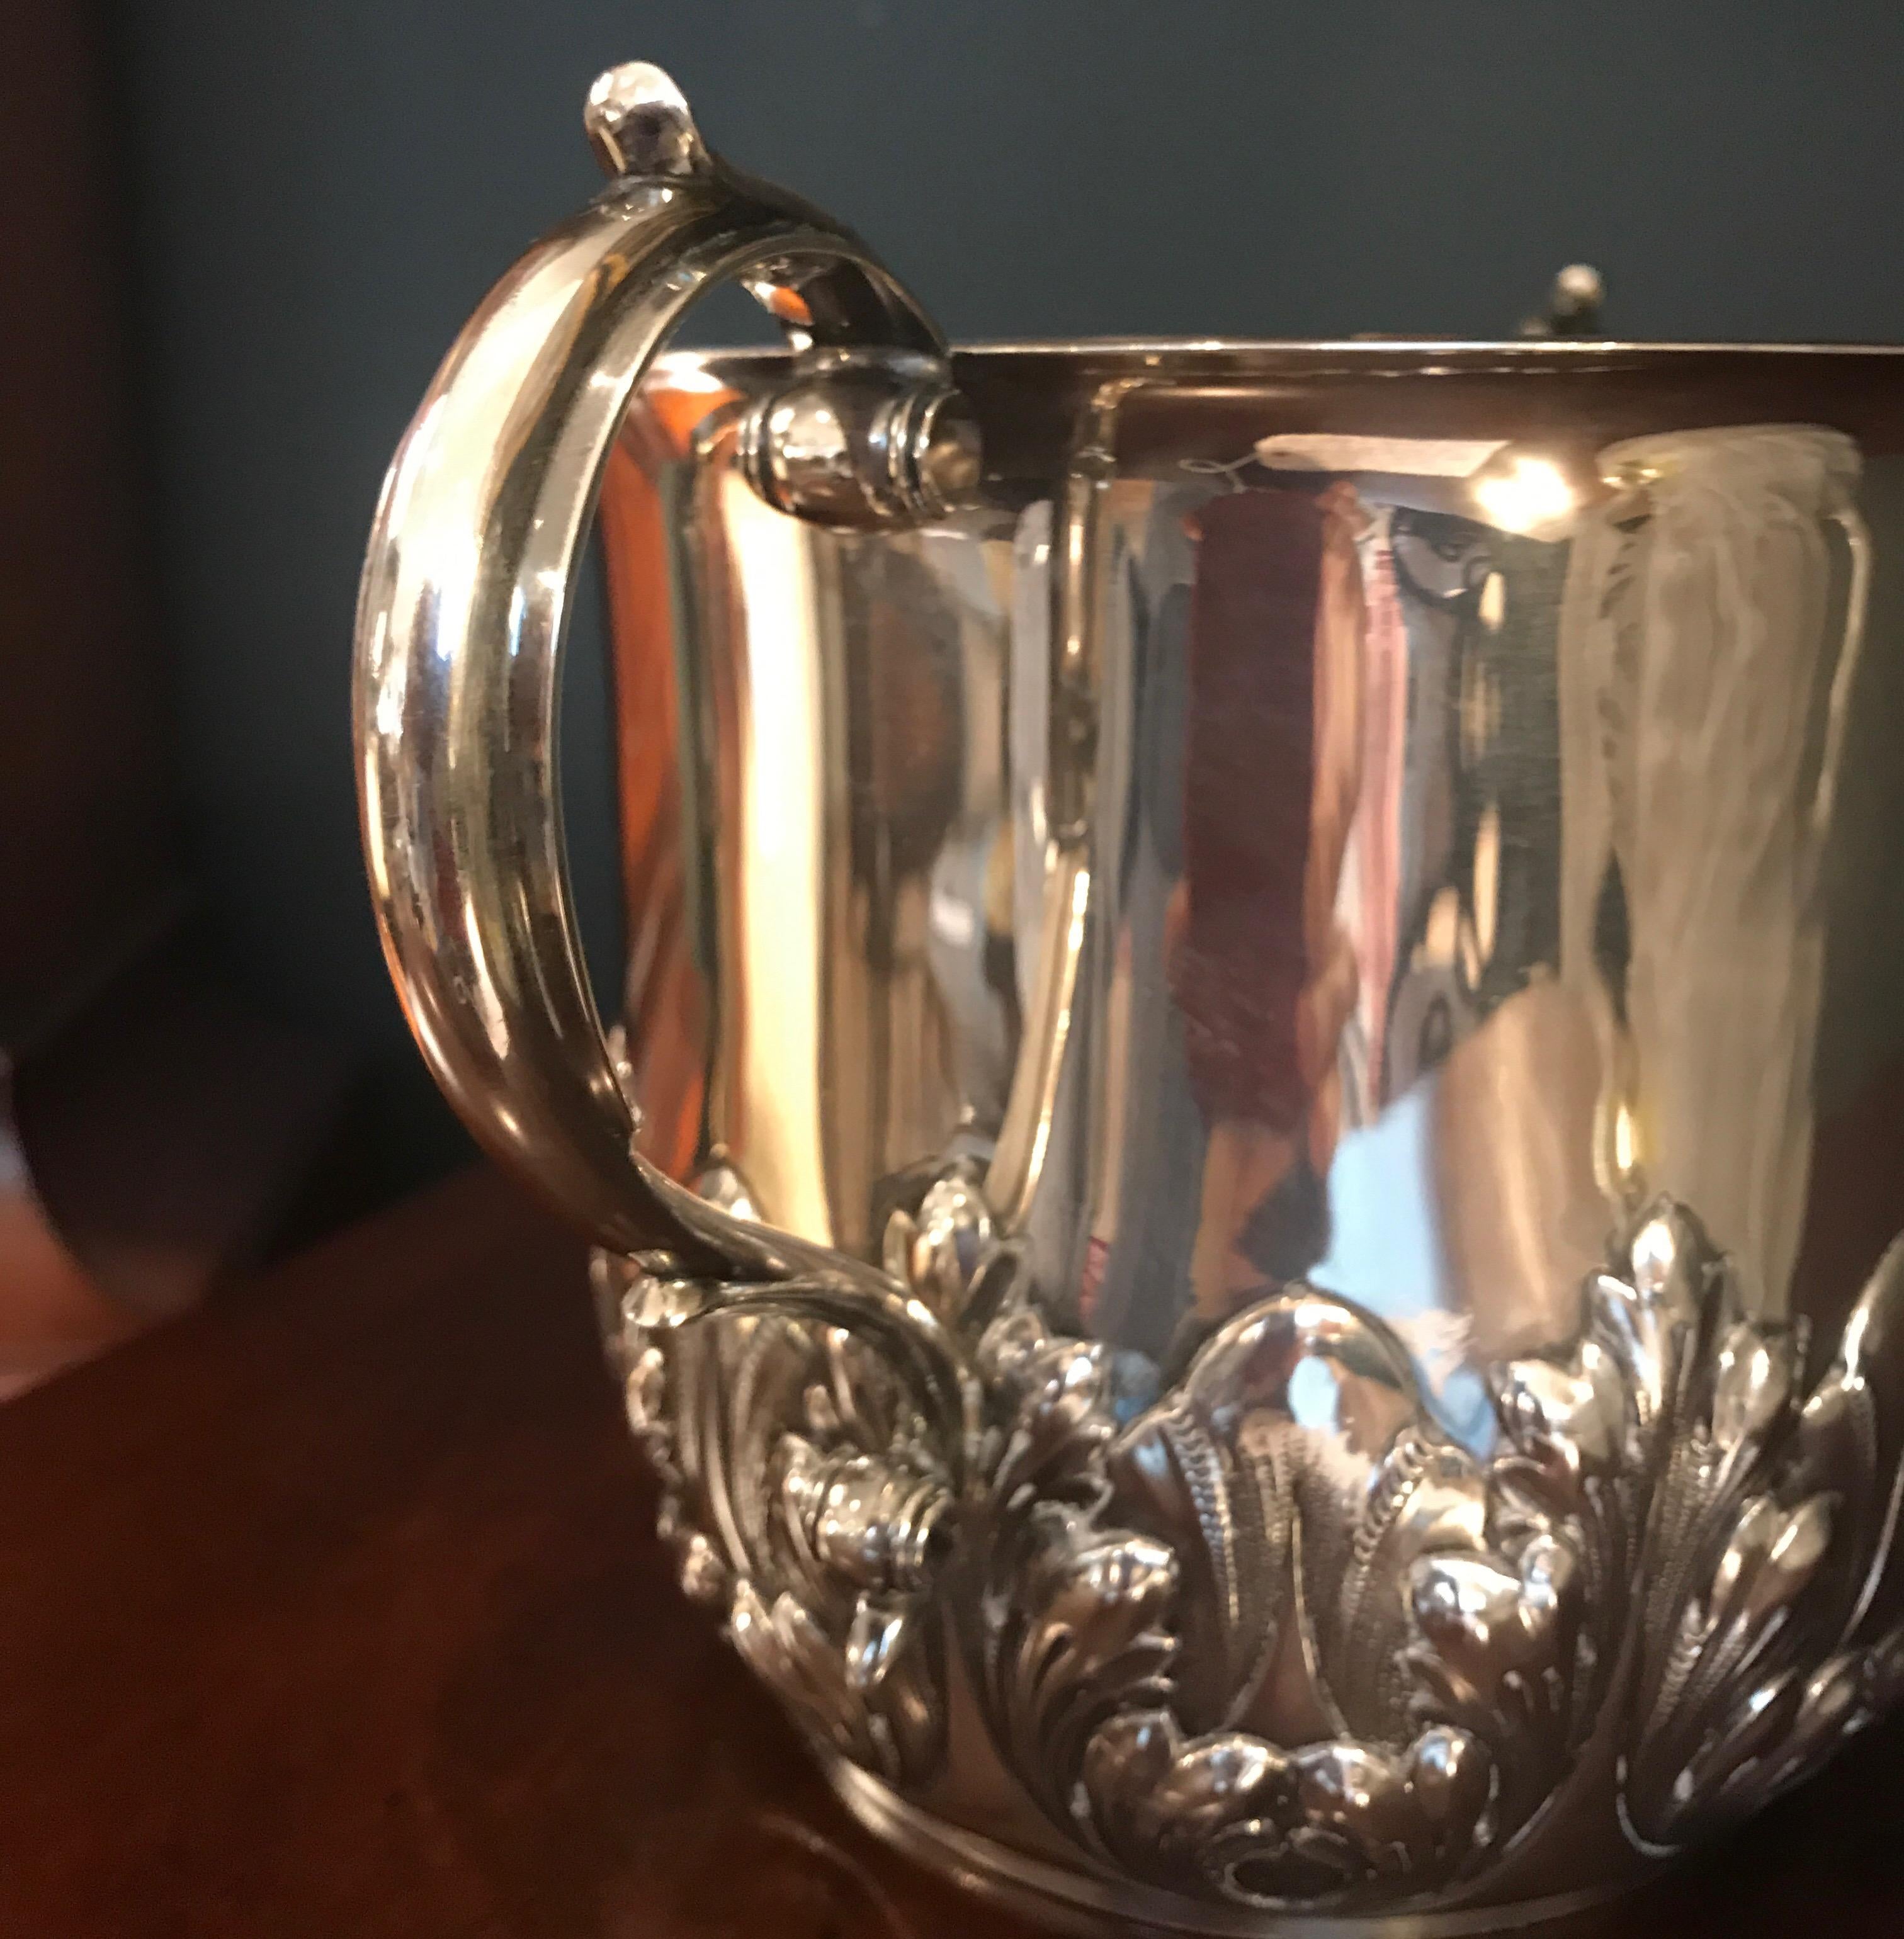 Baroque Revival 19th Century Sterling Silver Ice Bucket by Dominick and Haff